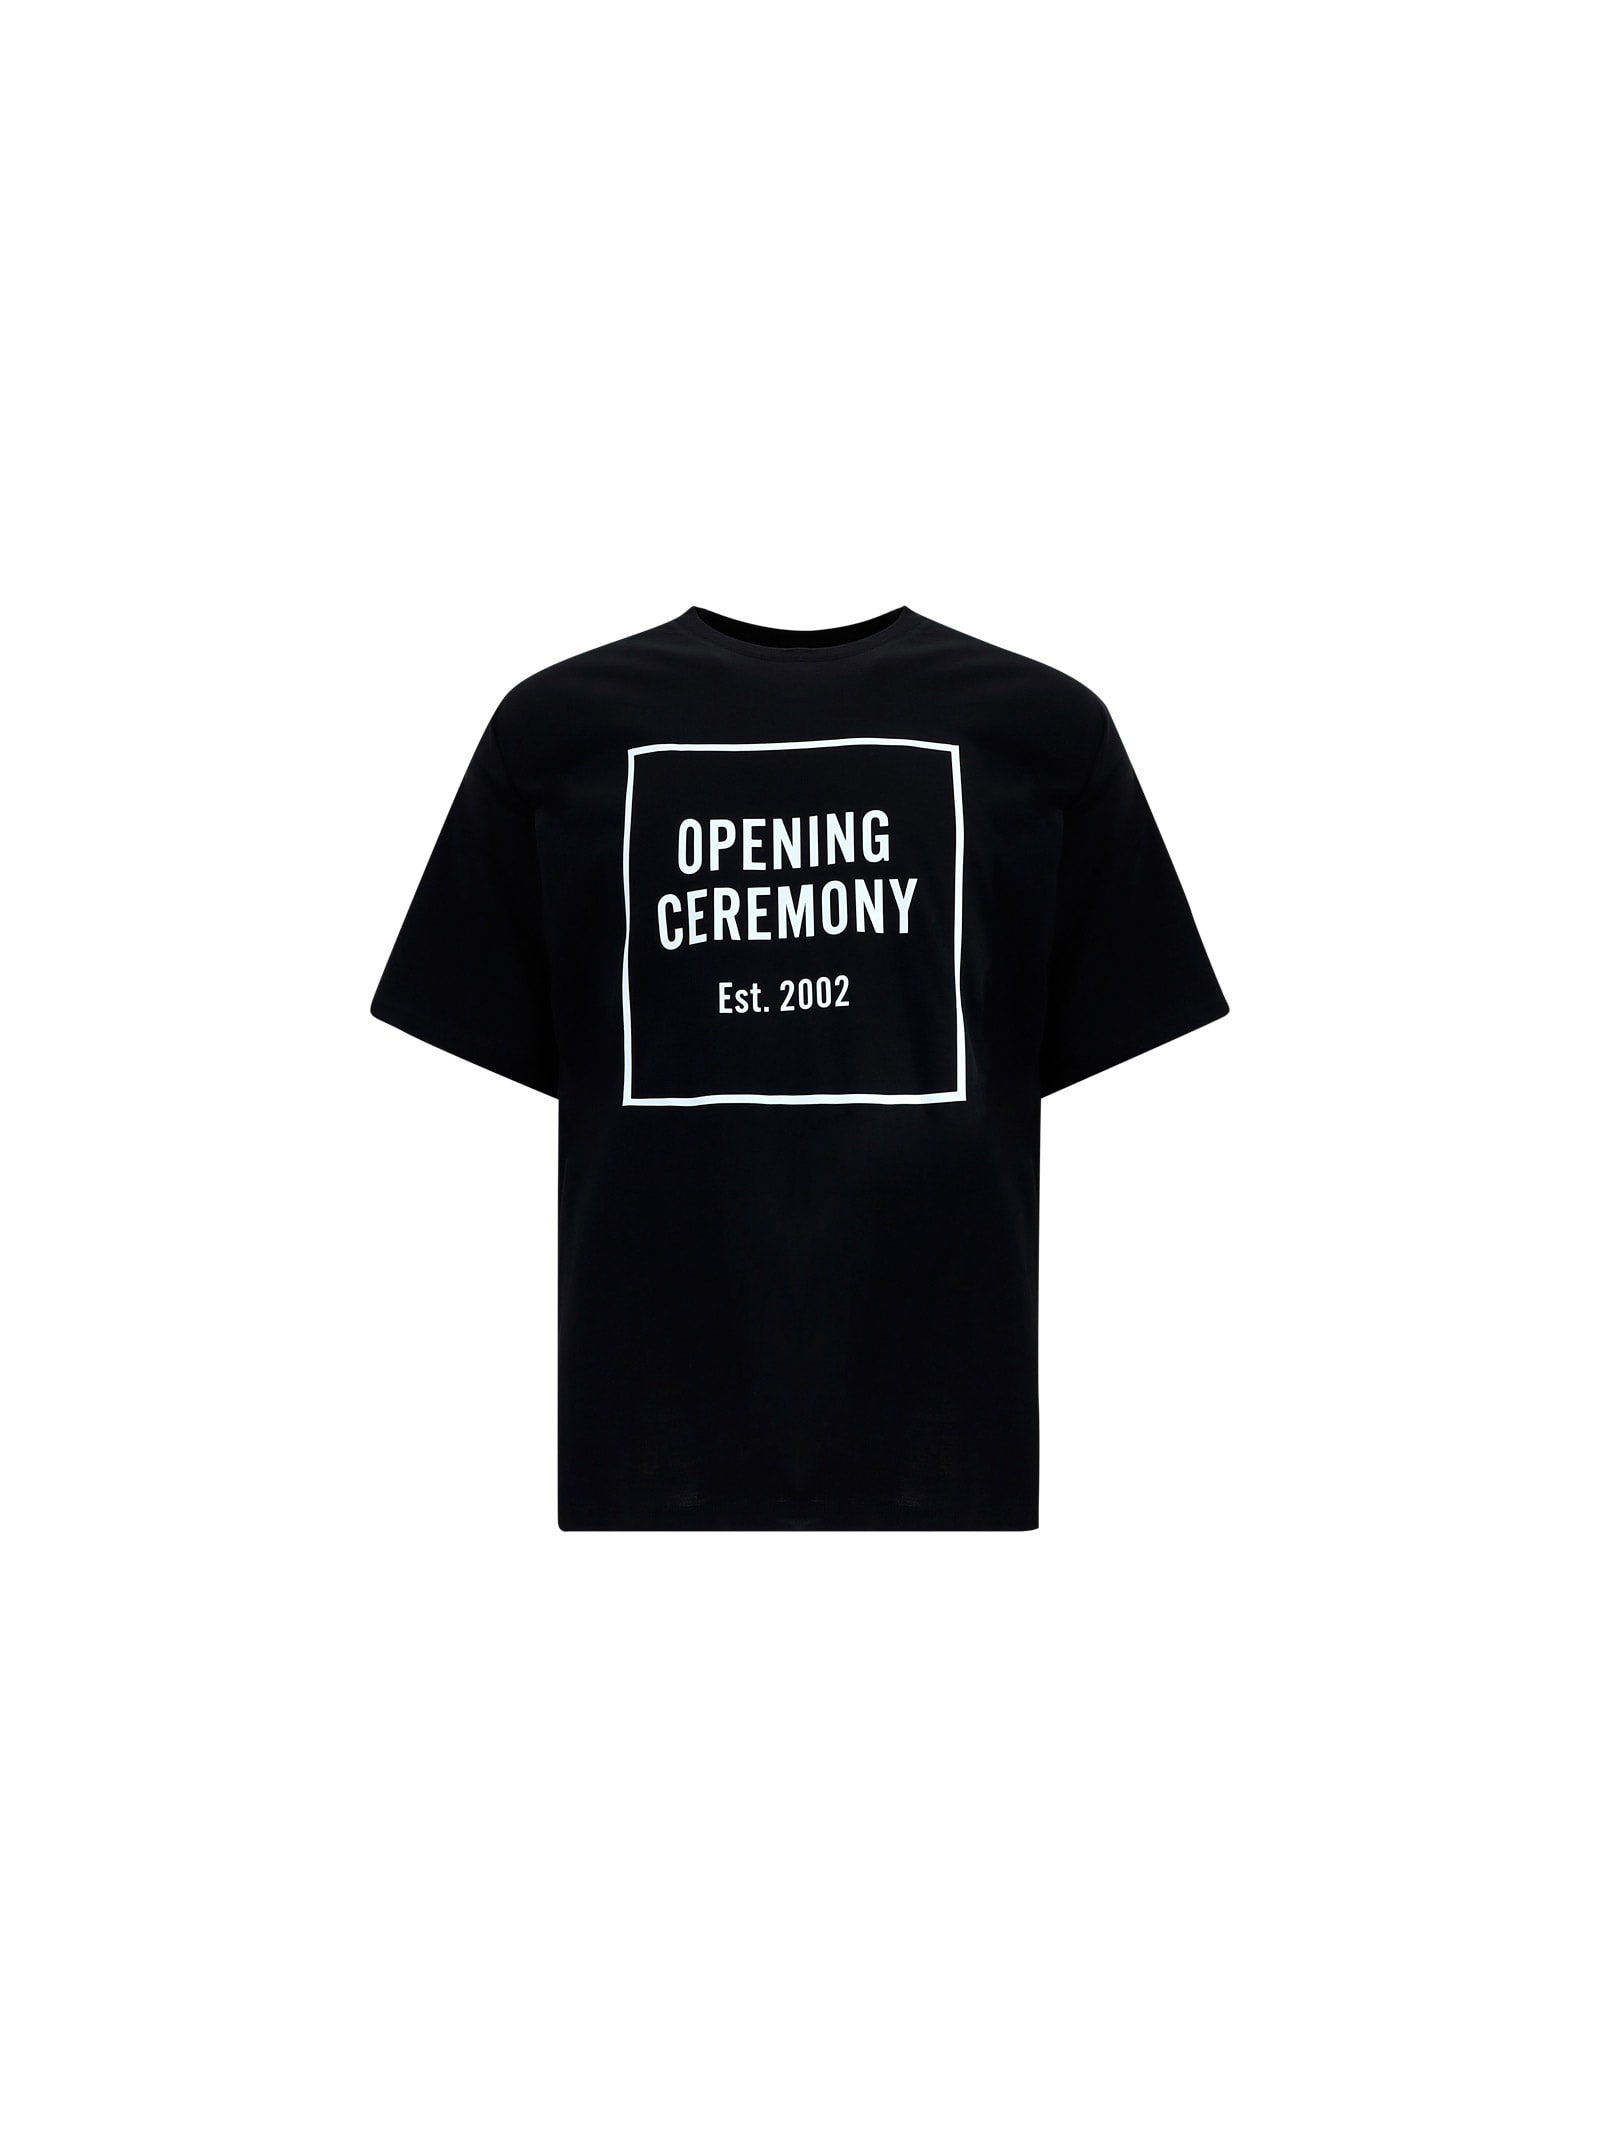 OPENING CEREMONY T-SHIRT